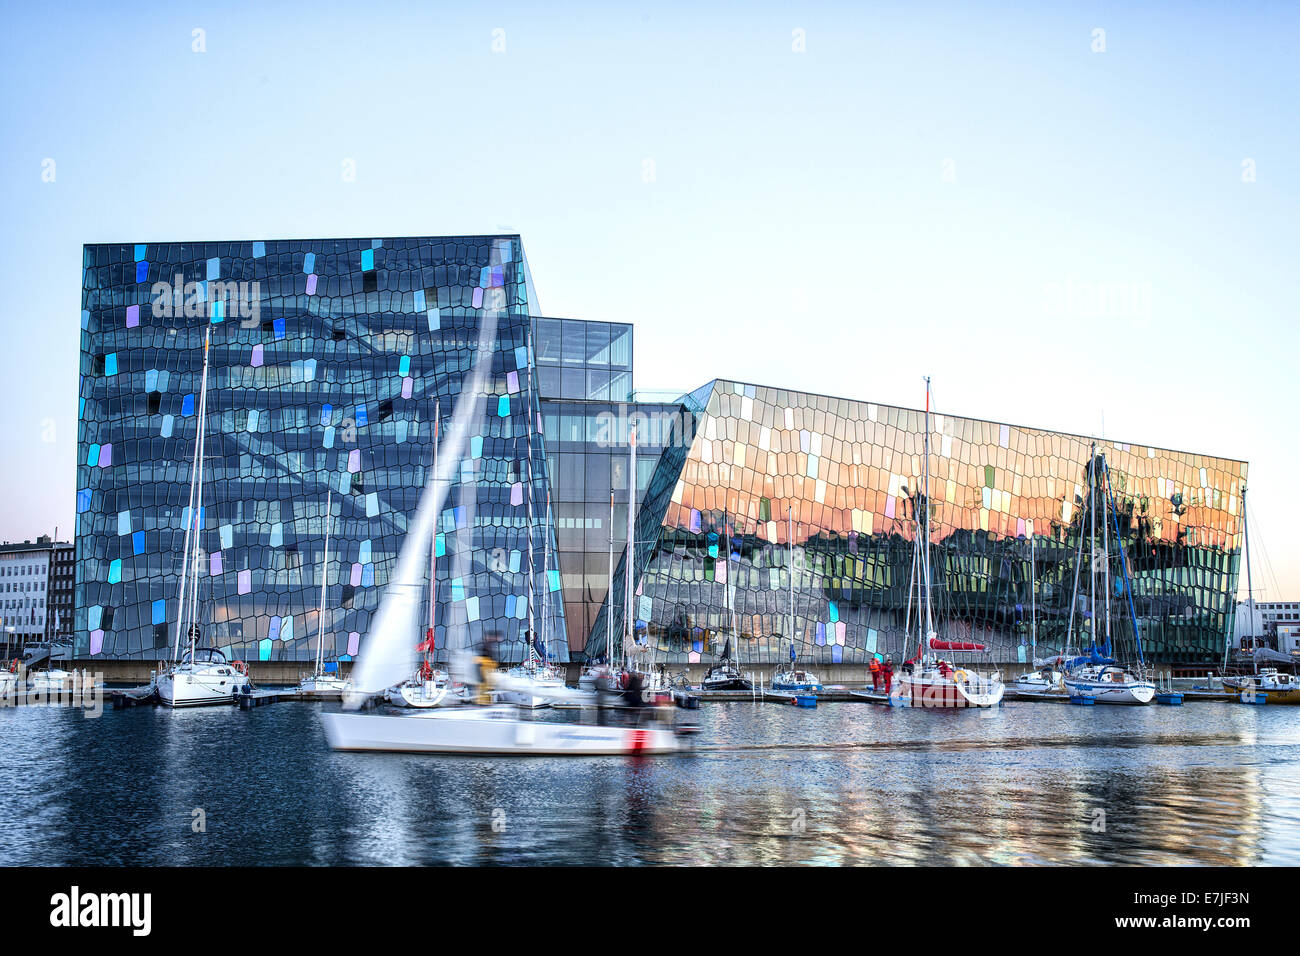 Architecture, attraction, facade, glass facade, harbour, port, harp, Harpa, capital, Iceland, Europe, conference center, concert Stock Photo